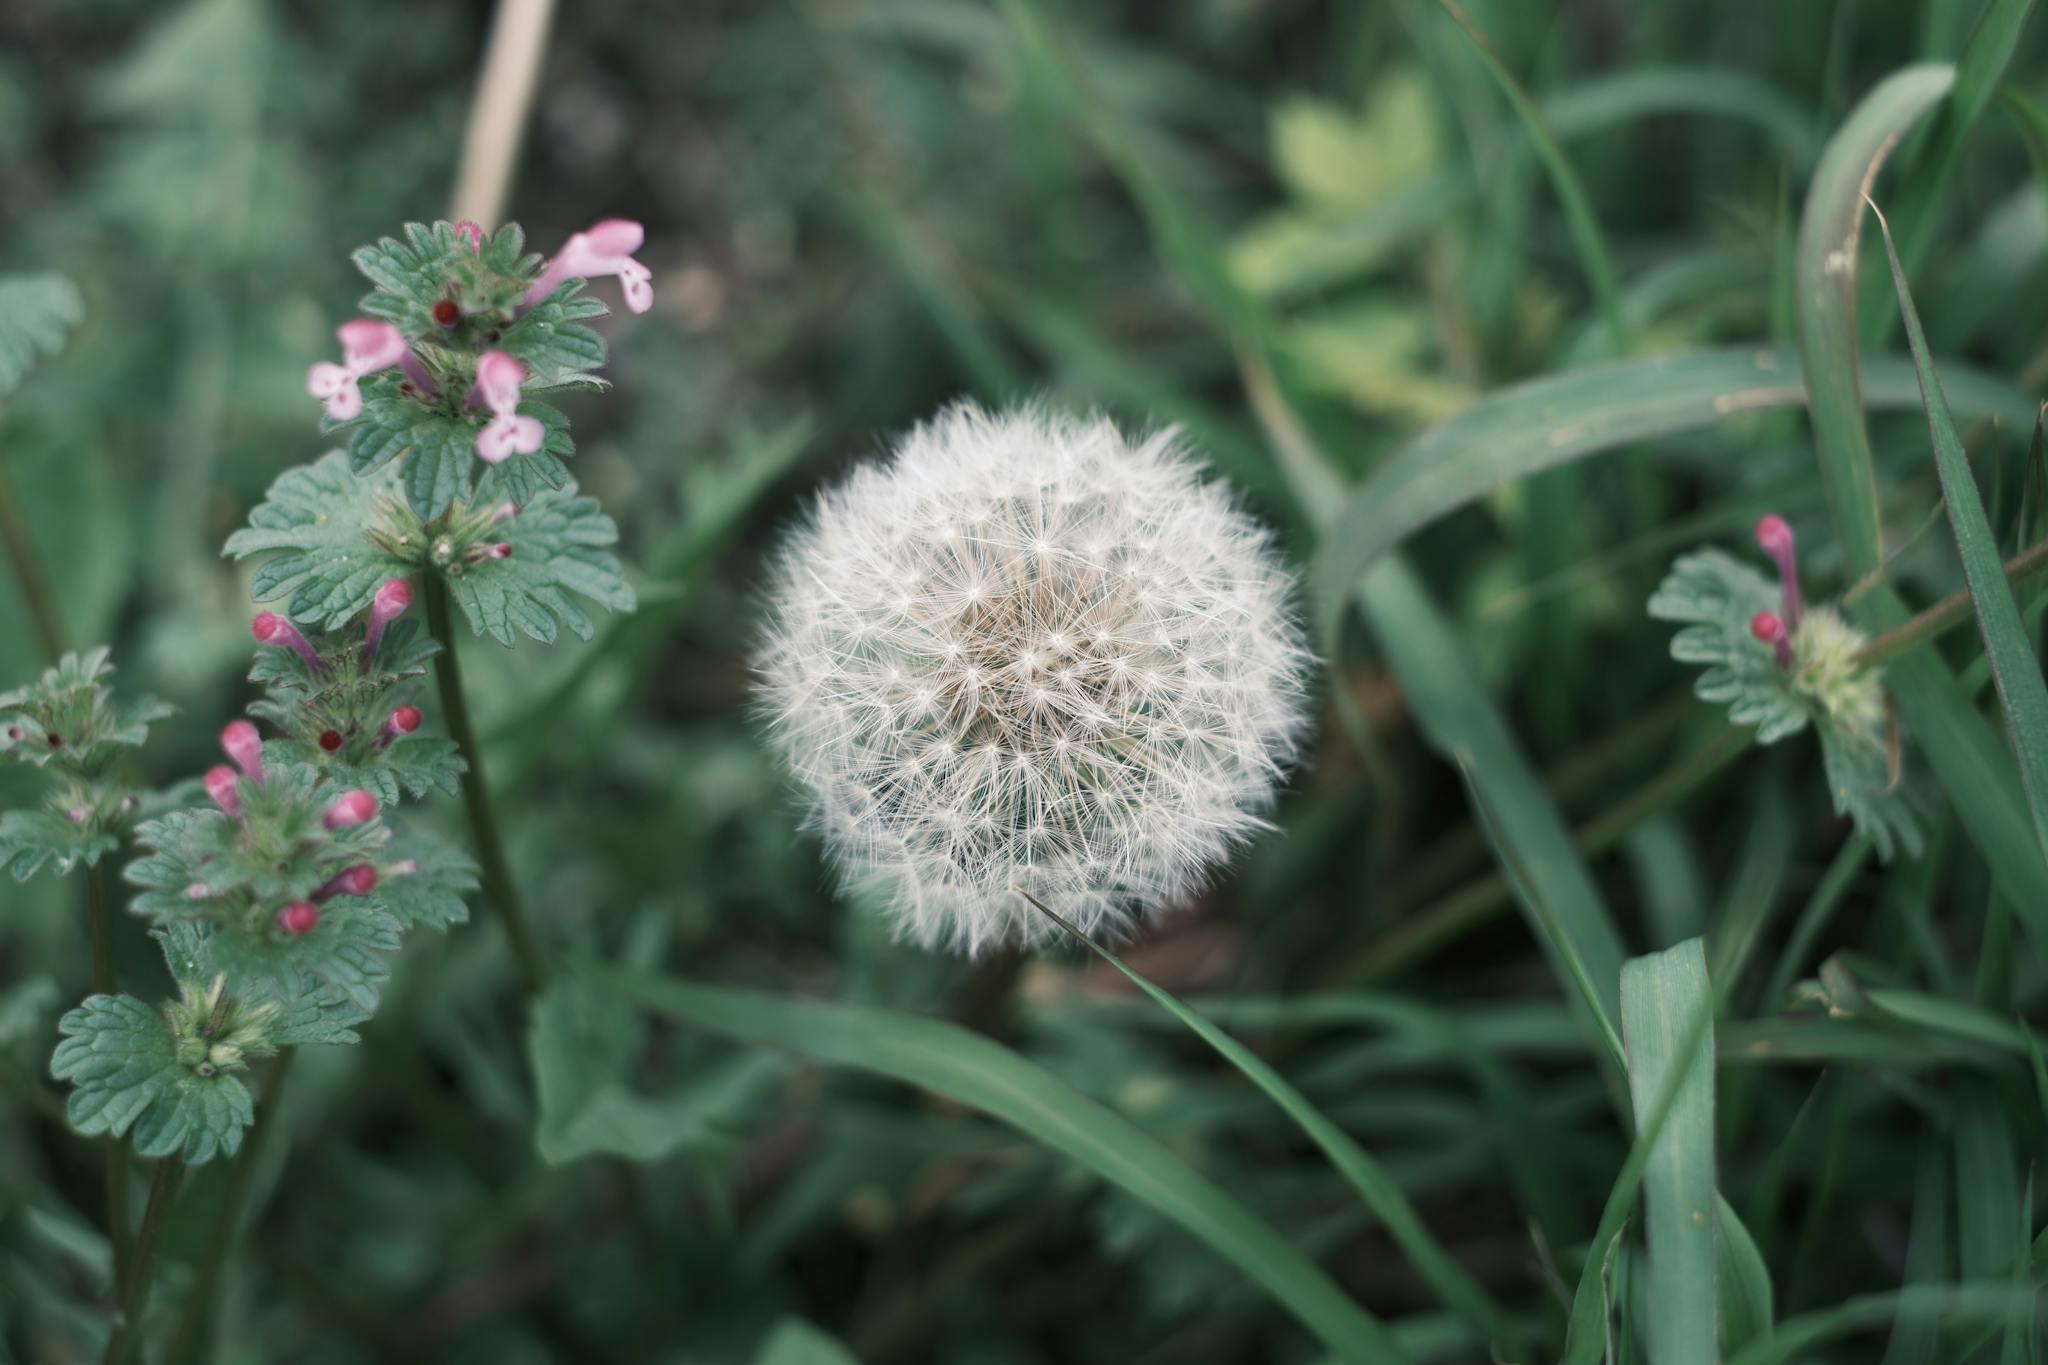 A dandelion seed head in focus, surrounded by green foliage and small pink flowers